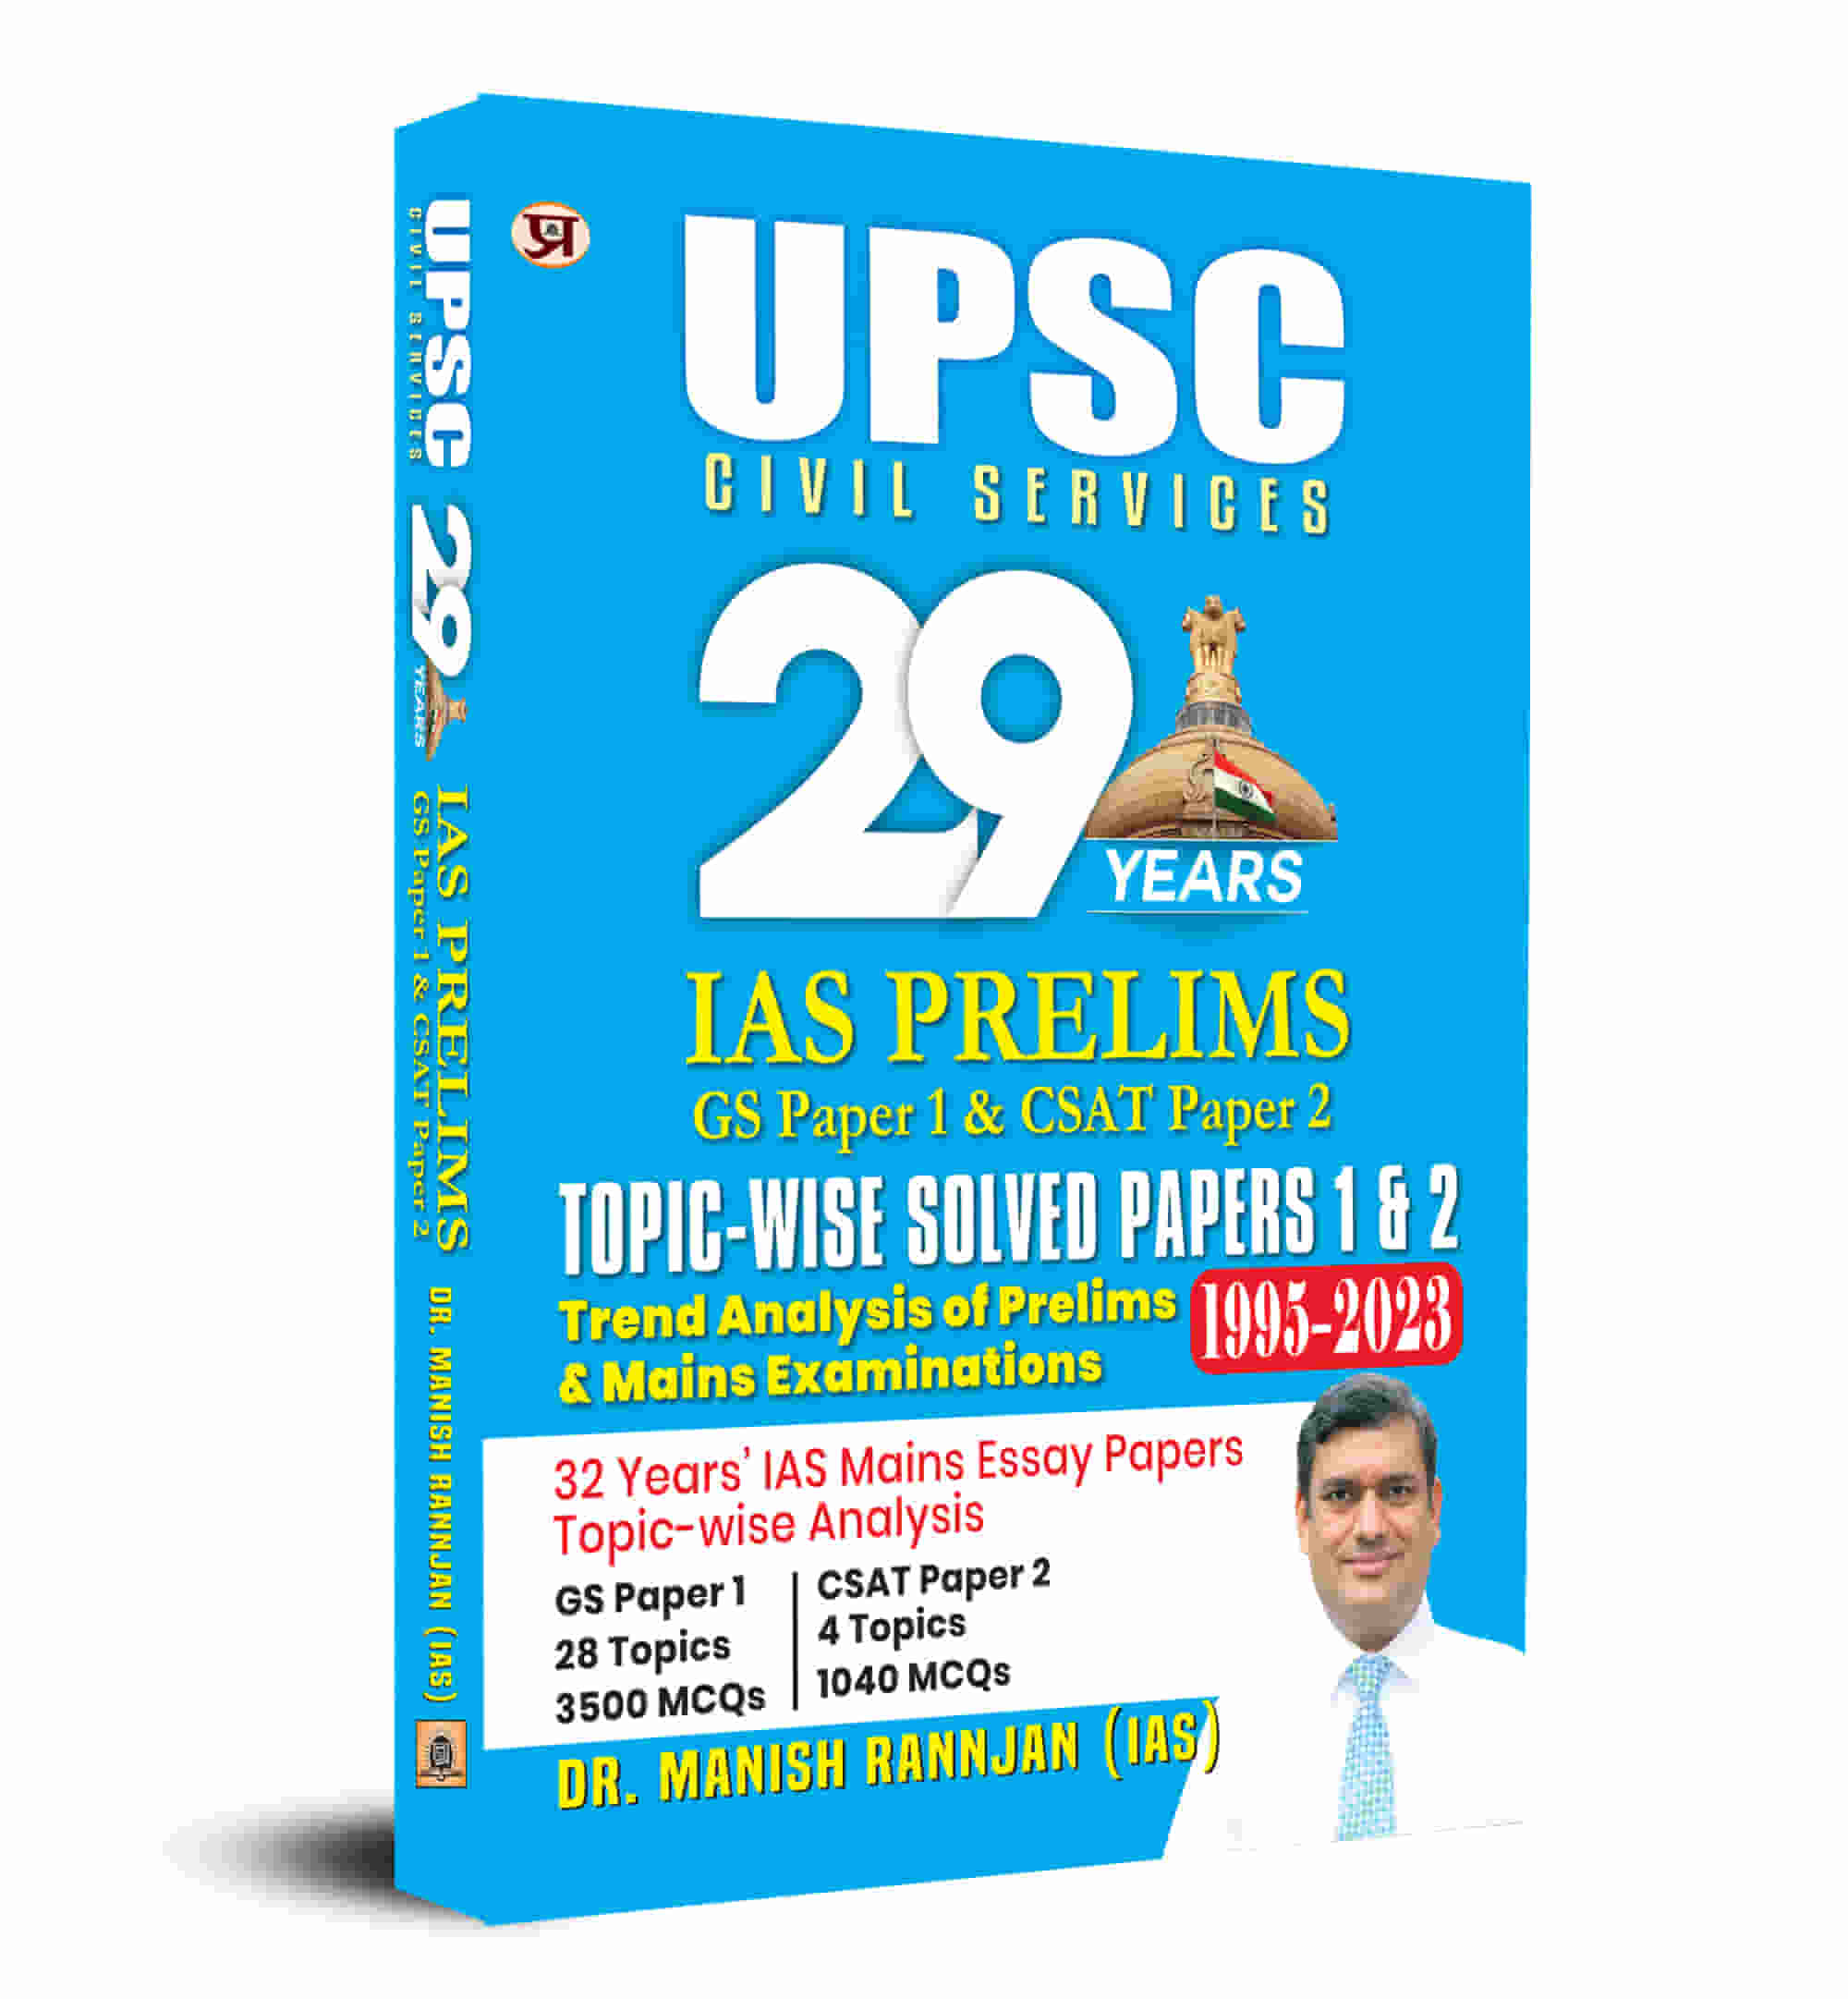 UPSC Civil Services  29 Years Ias Prelims Gs Paper 1 & Csat Paper 2 Topic-Wise Solved Papers 1 & 2 1995-2023